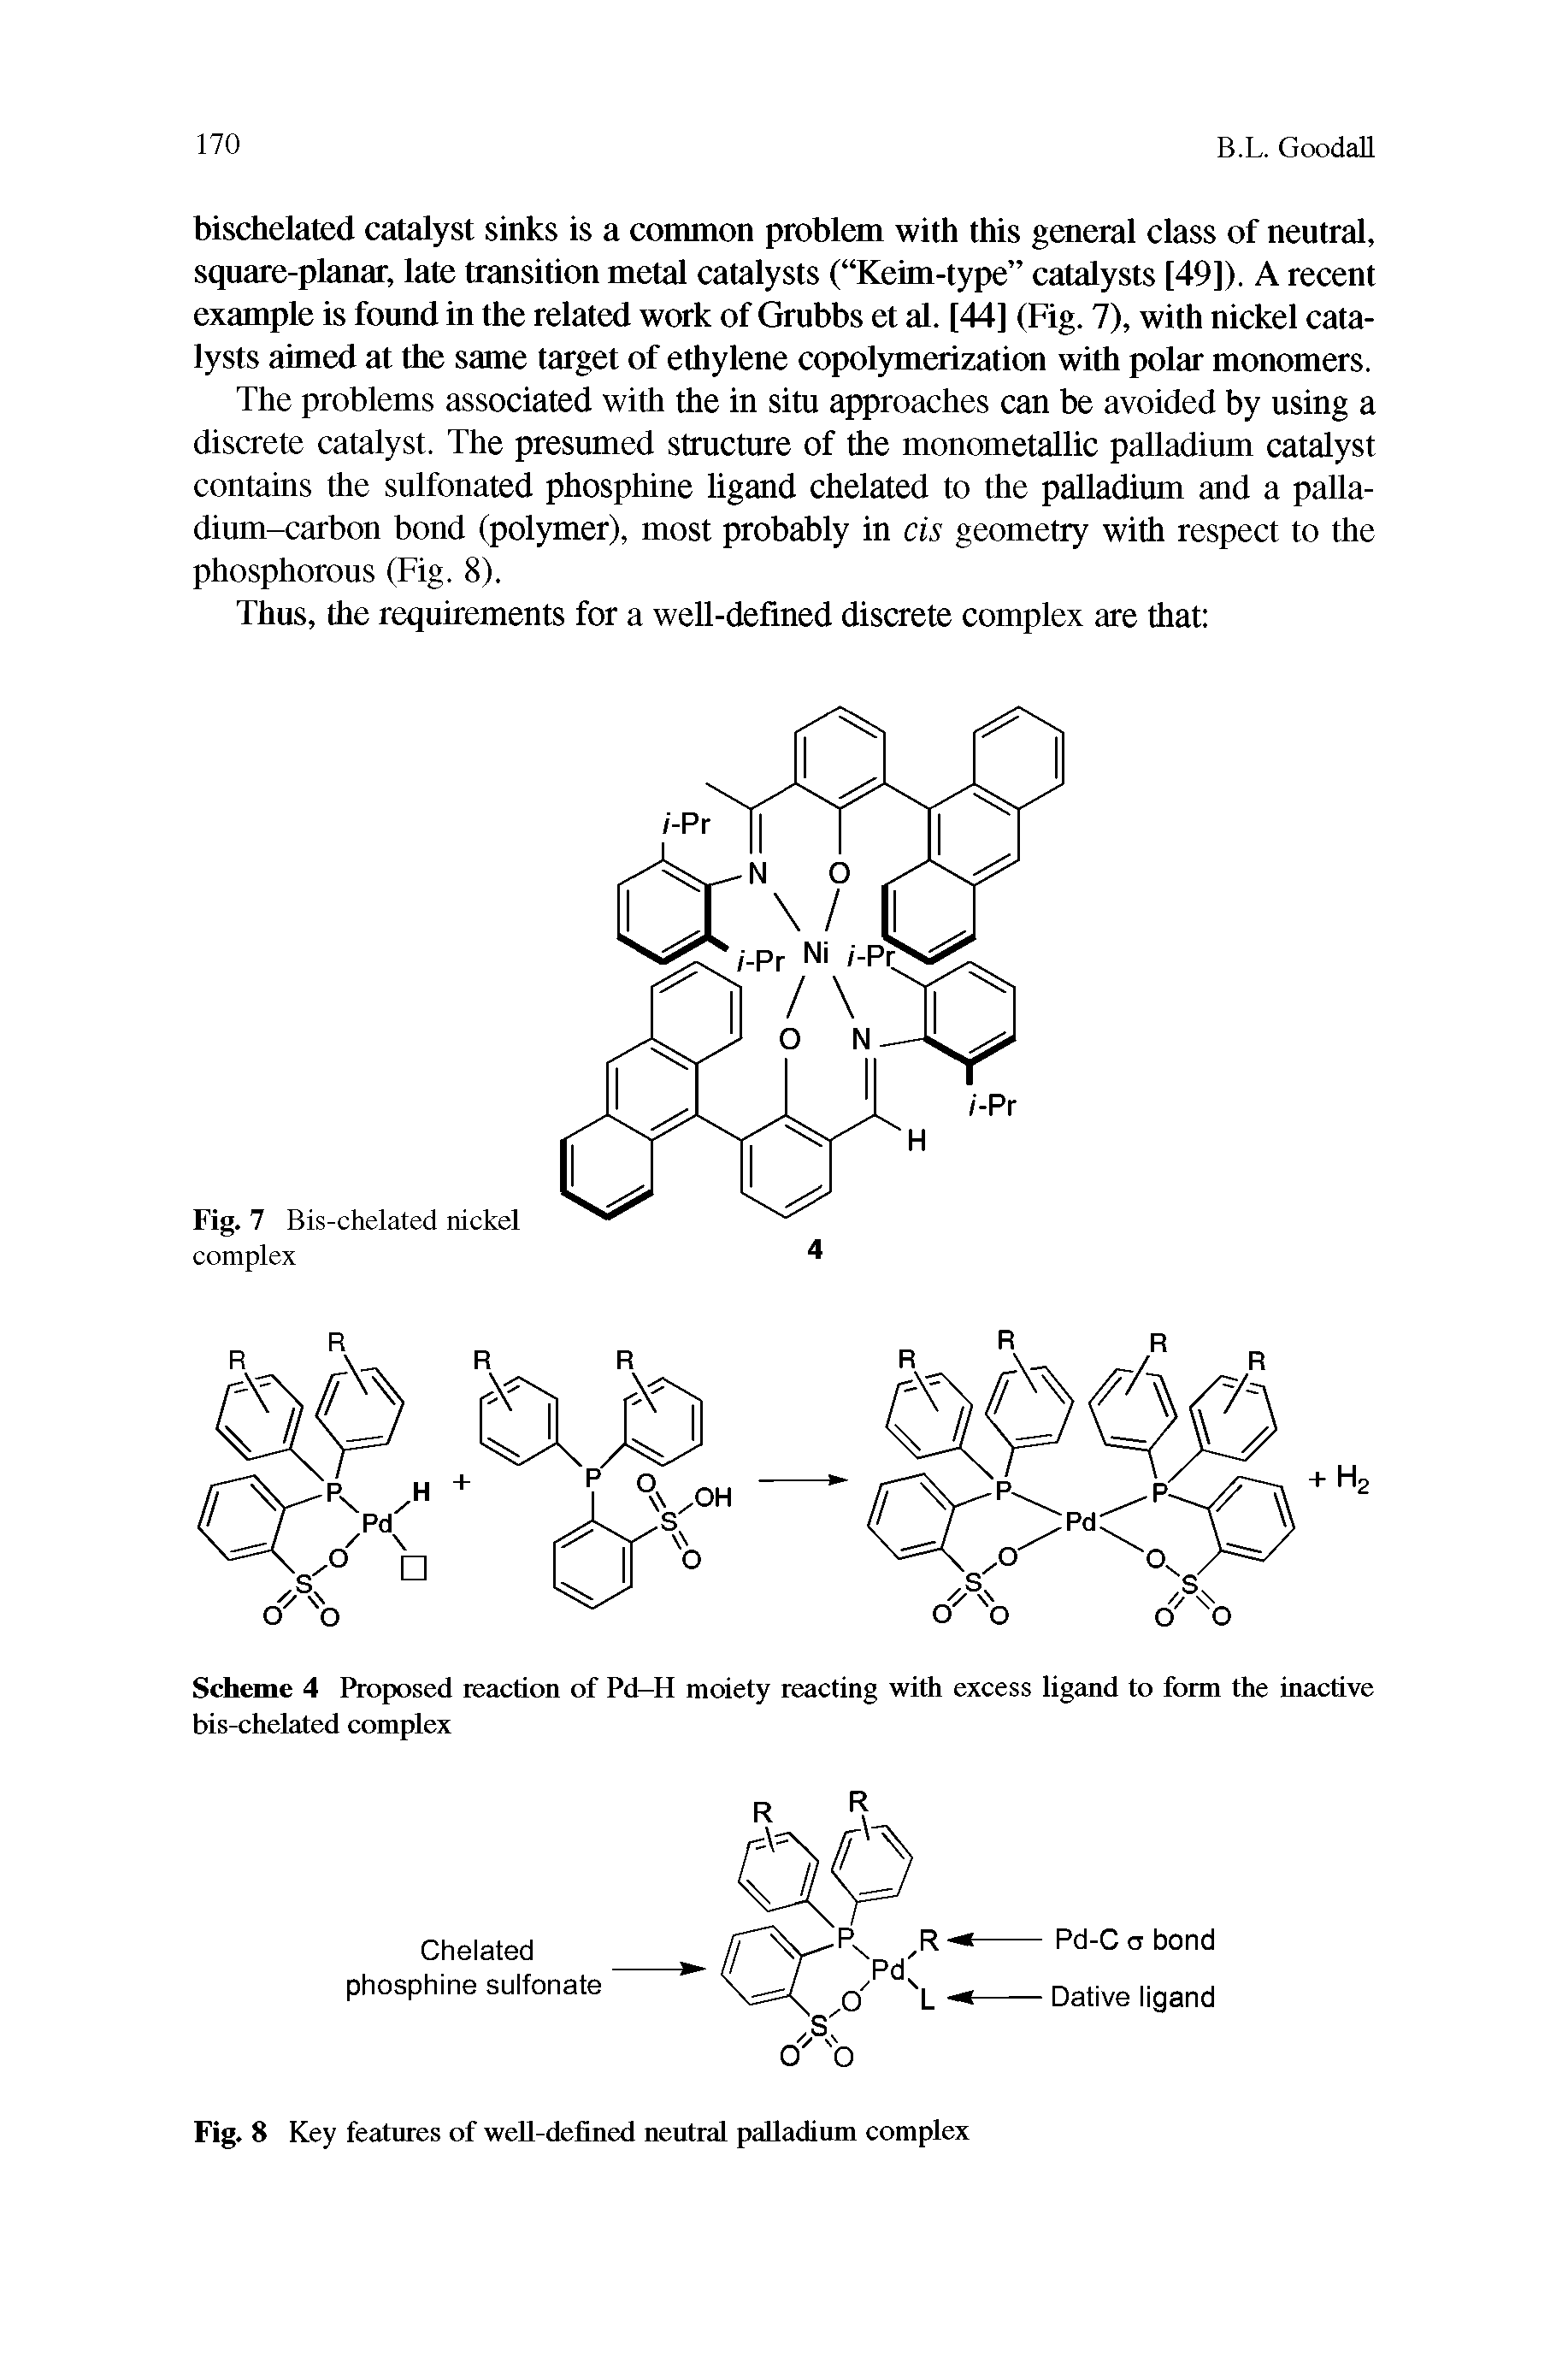 Scheme 4 Proposed reaction of Pd-H moiety reacting with excess ligand to form the inactive bis-chelated complex...